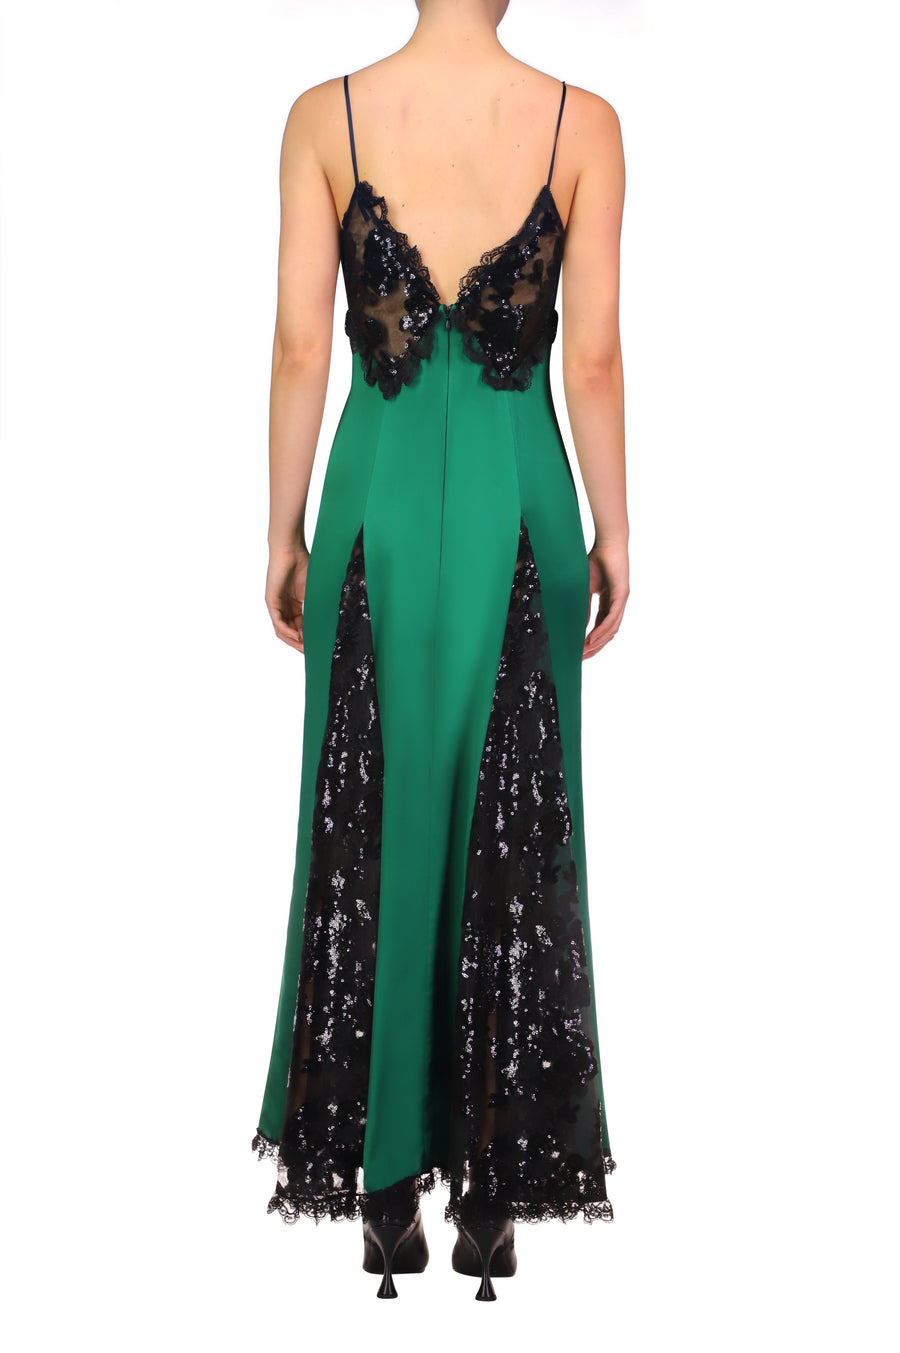 Green Silk Satin And Black Sequin Dress With Godet And Lace Ruffle